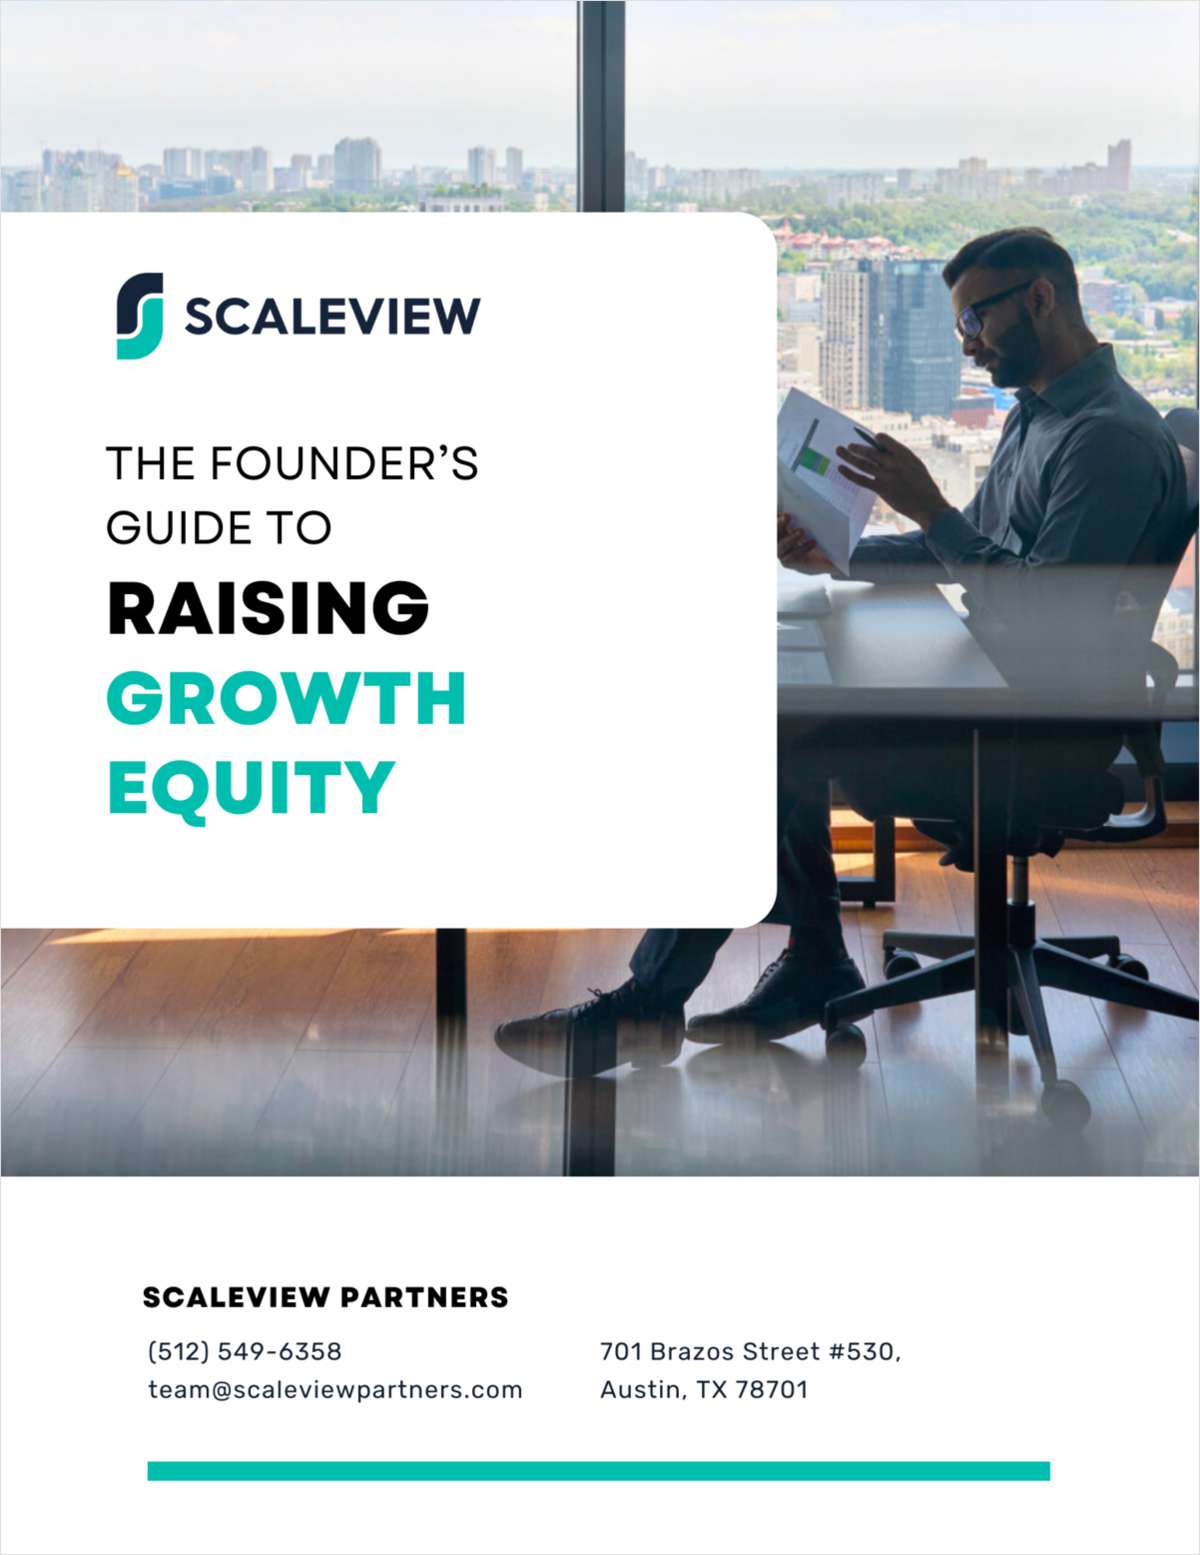 The Founder's Guide to Raising Growth Equity